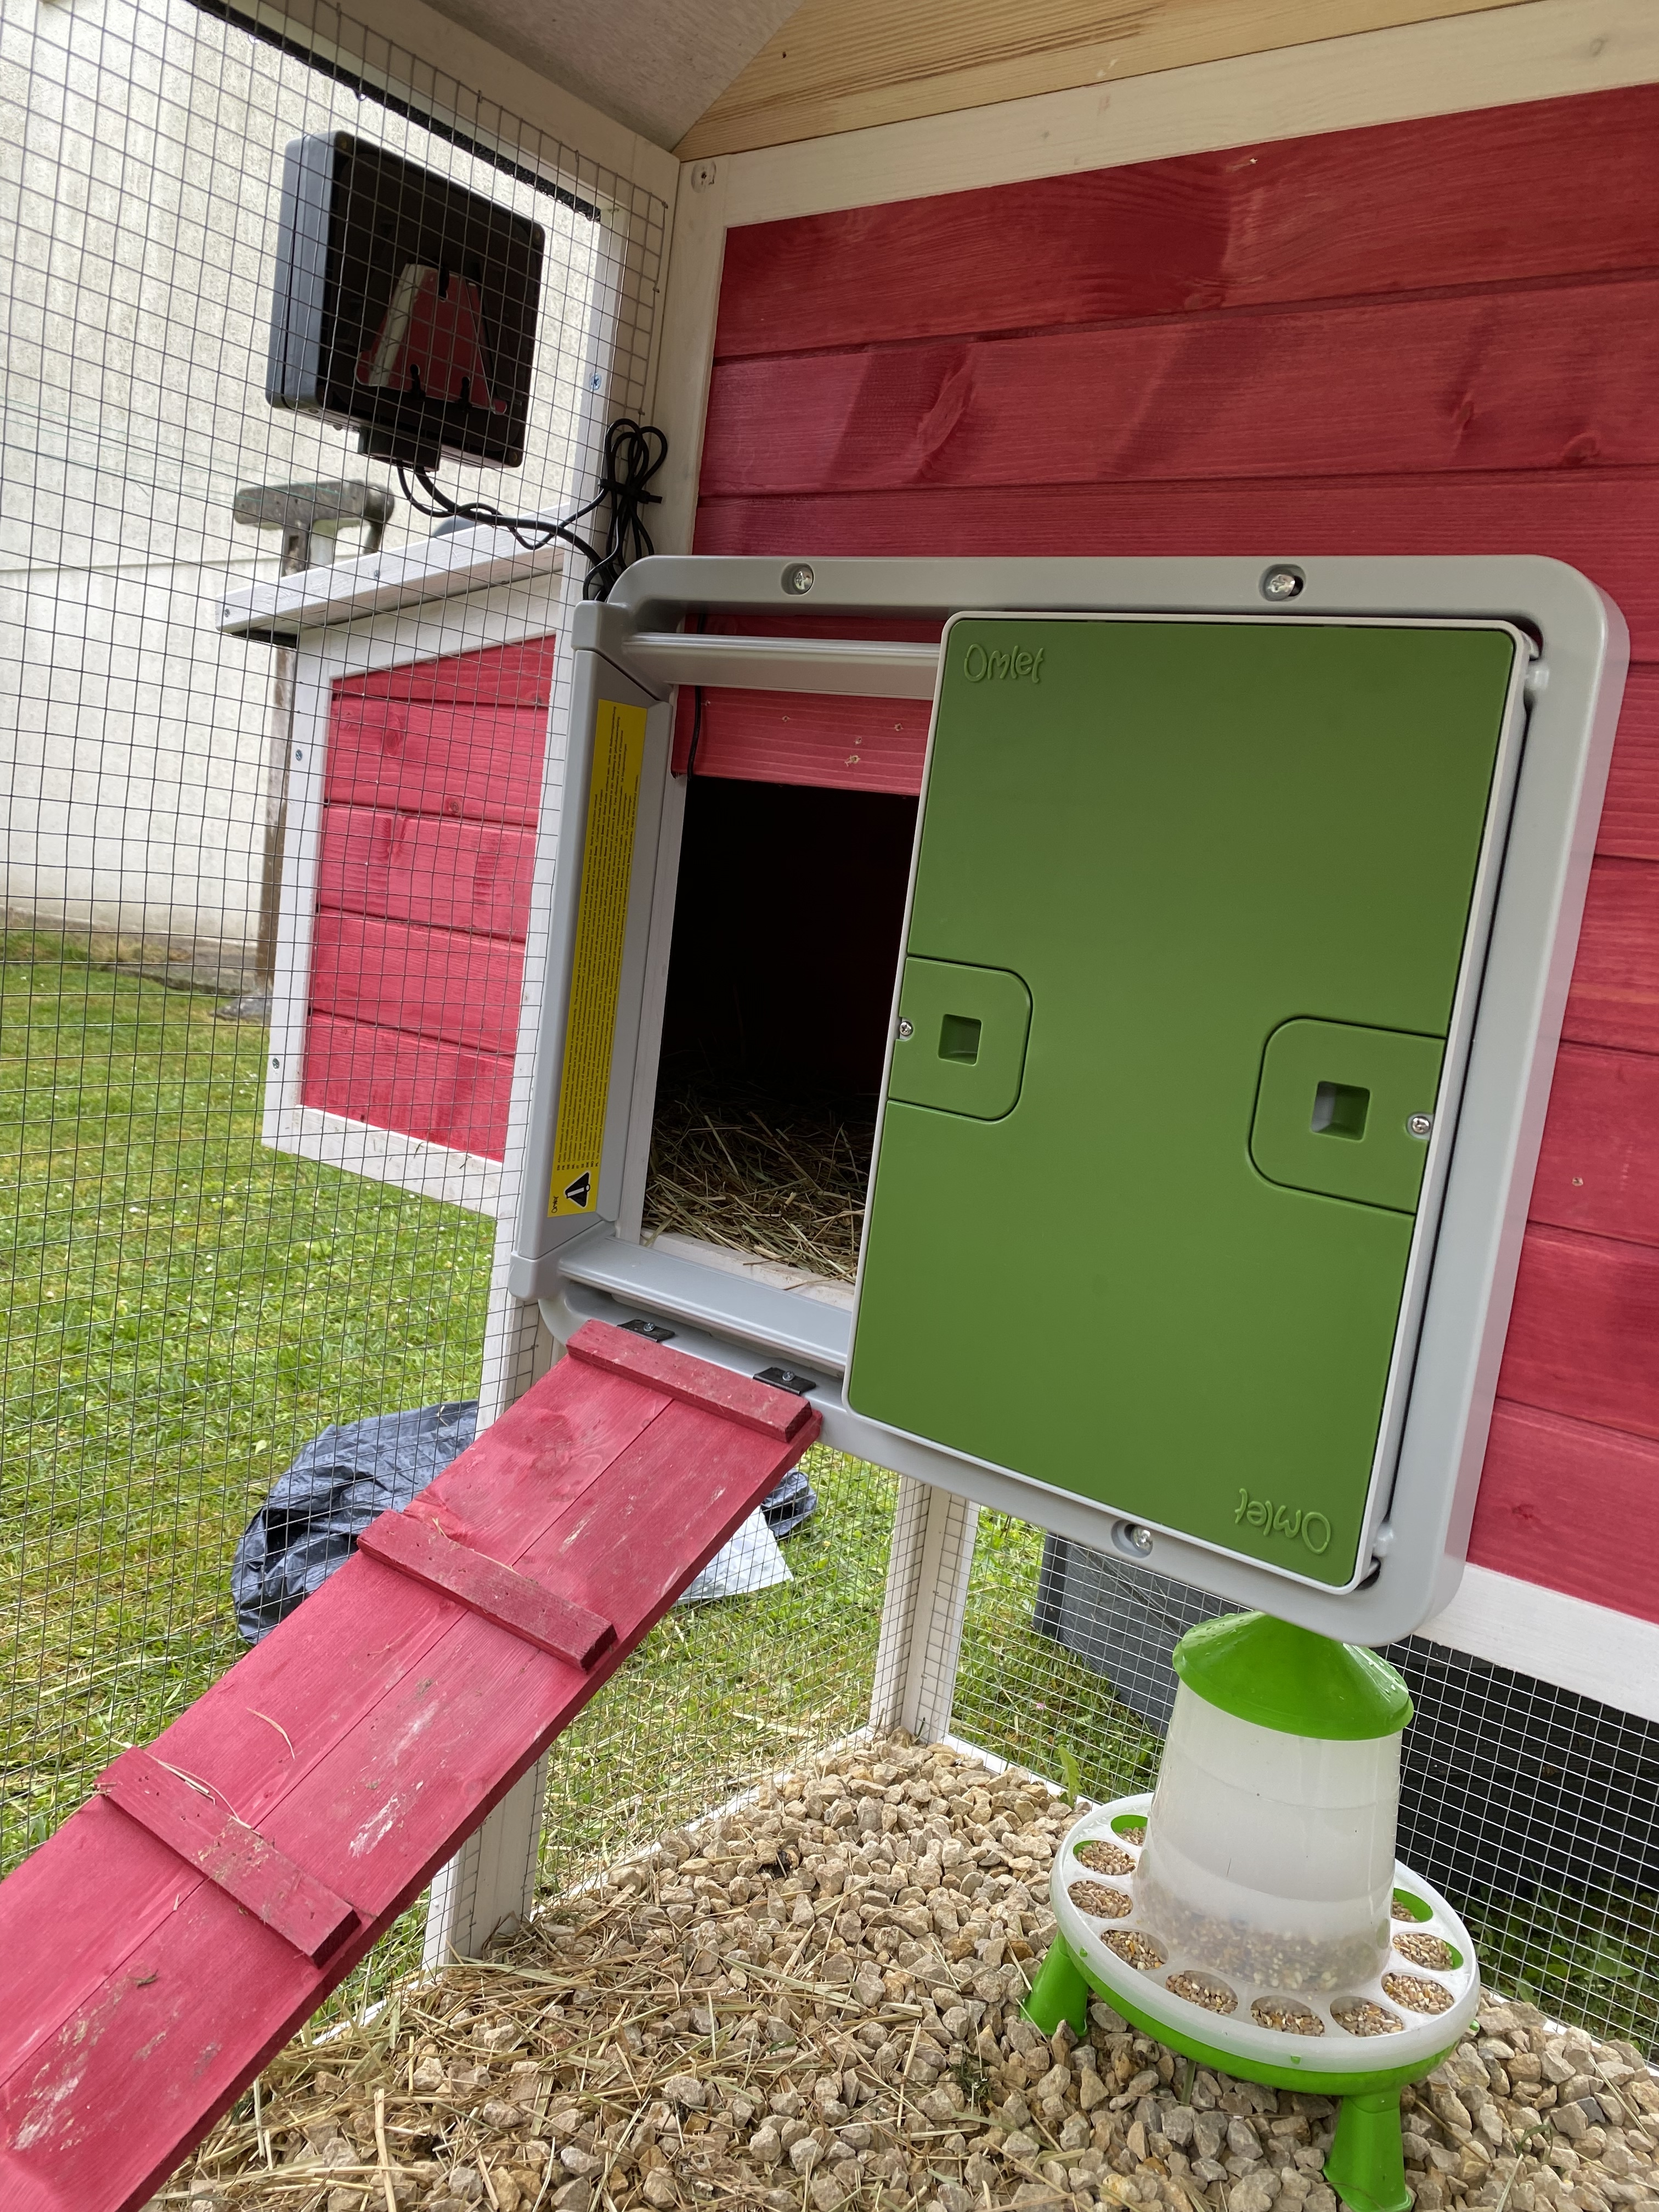 A green automatic coop door mounted on a red wooden coop